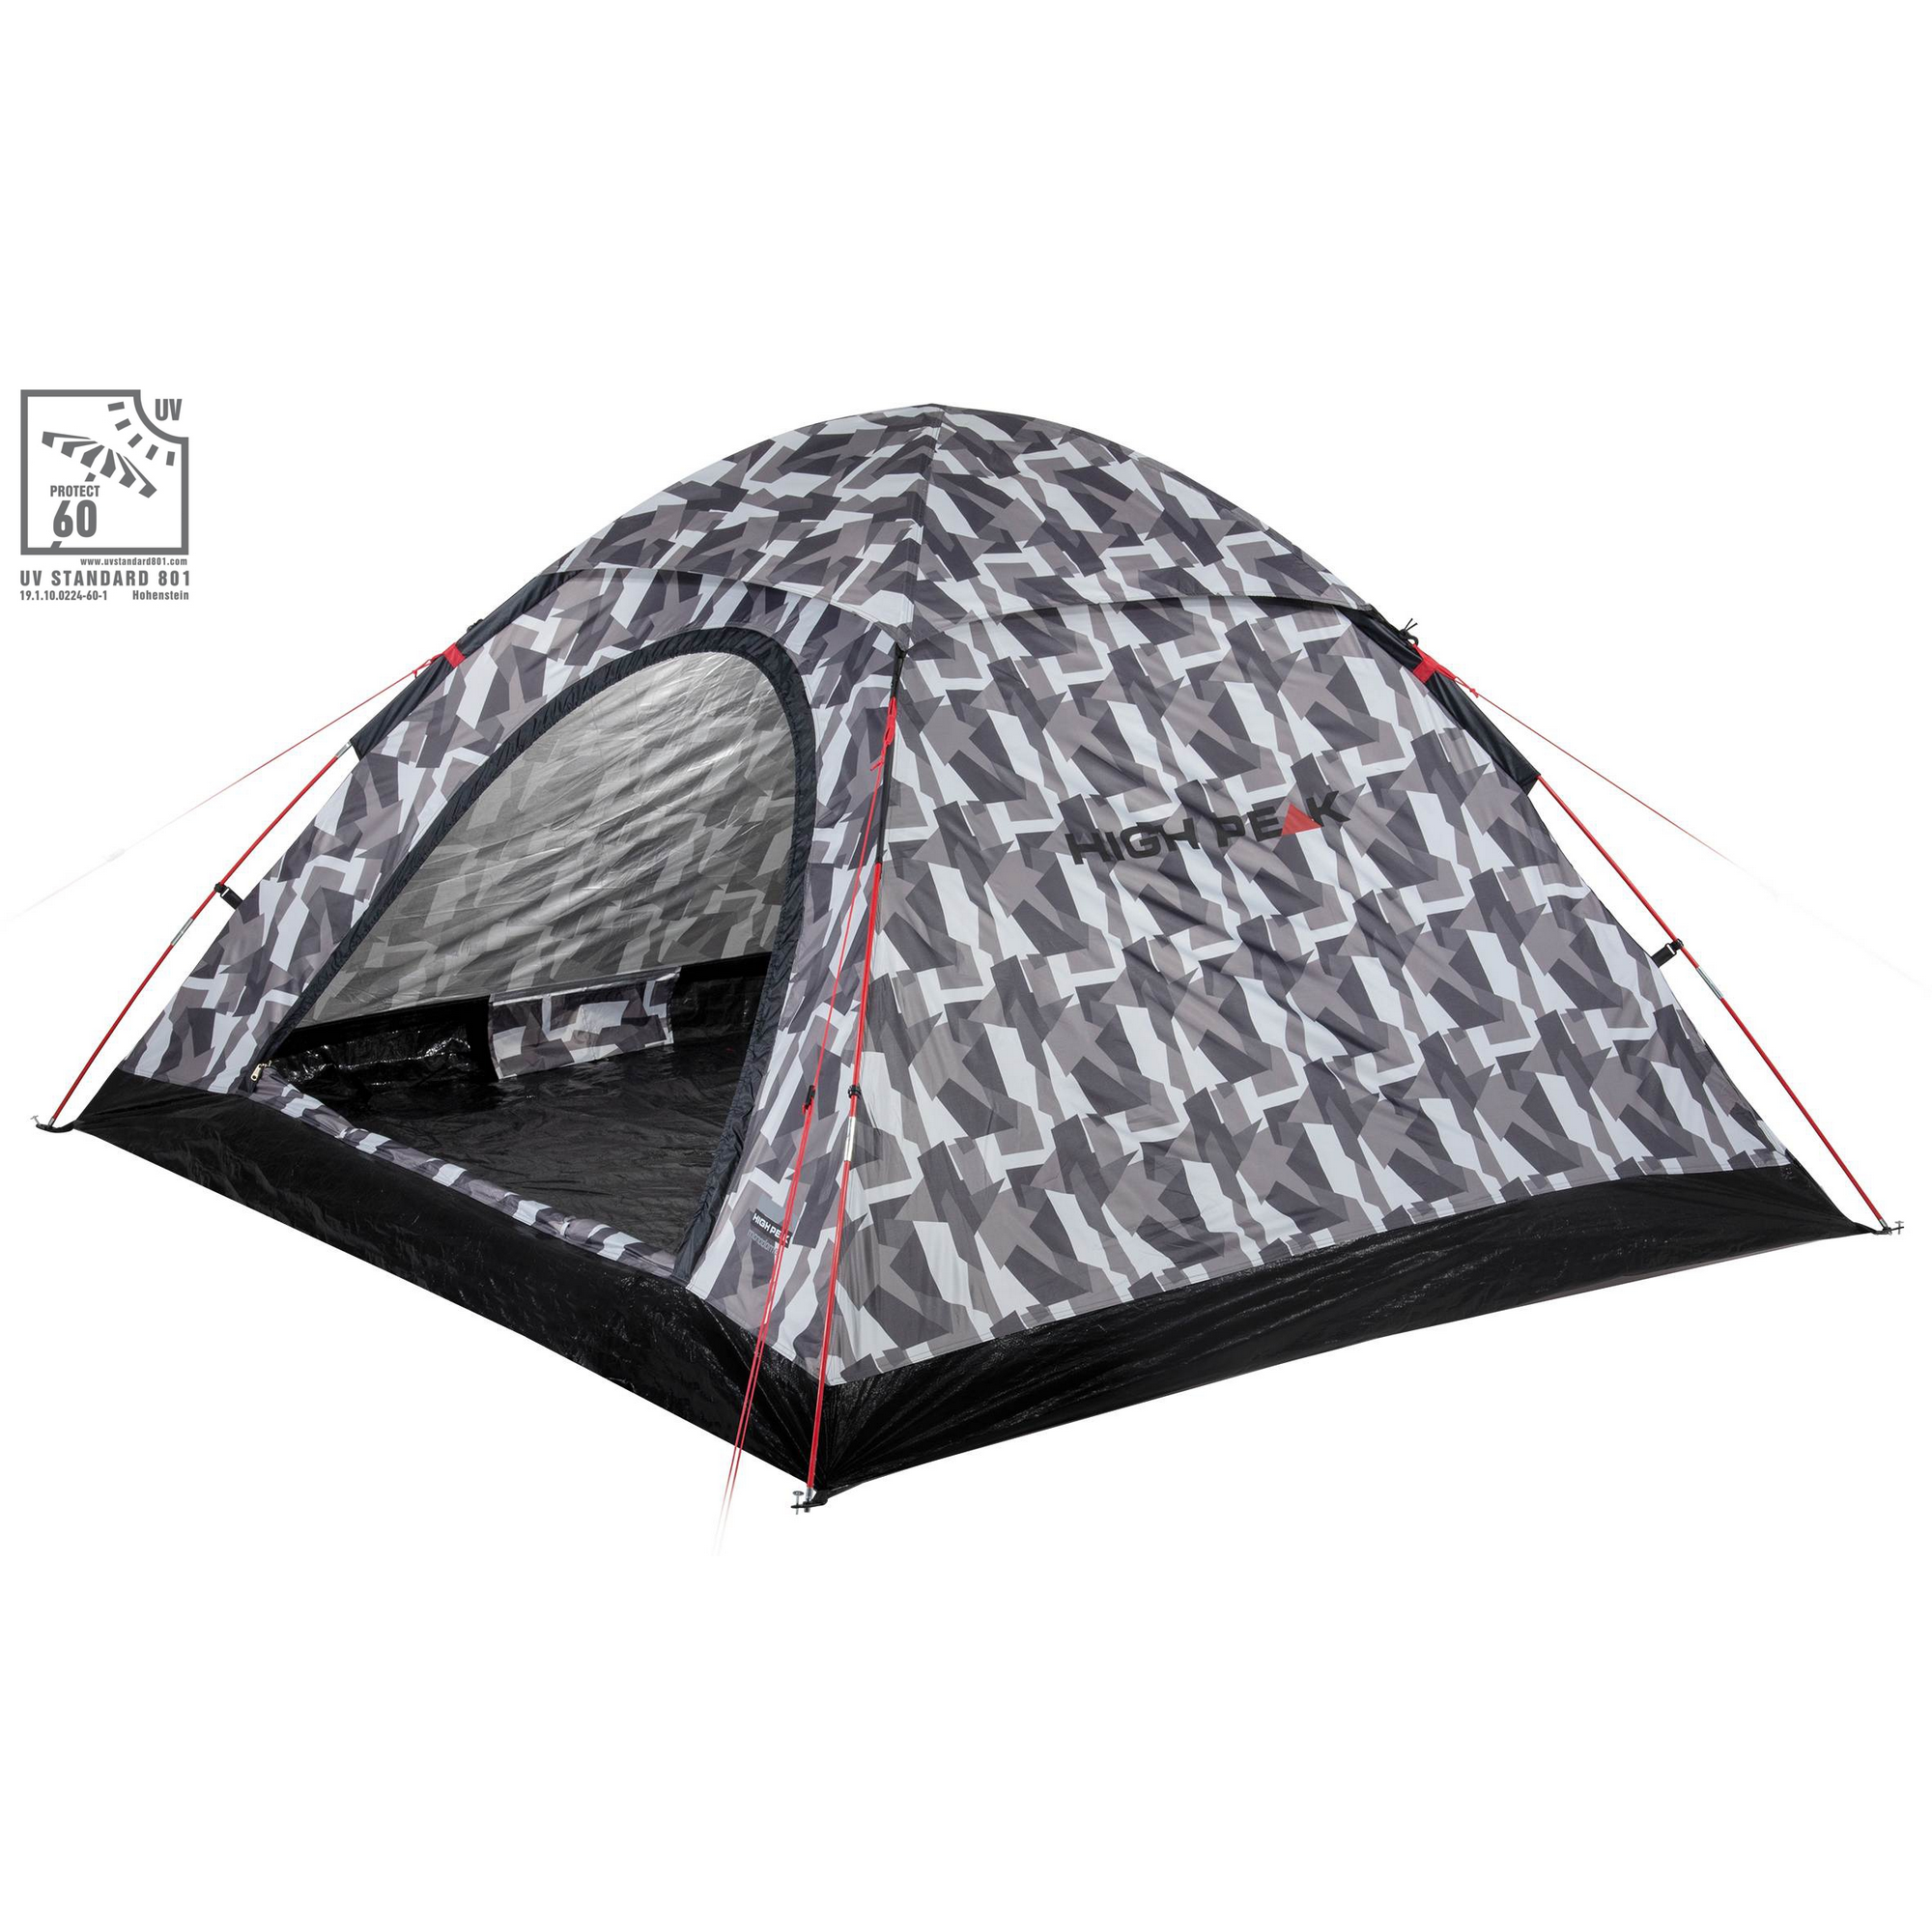 Zelt Monodome XL 130 x 240 cm camourflage + product picture